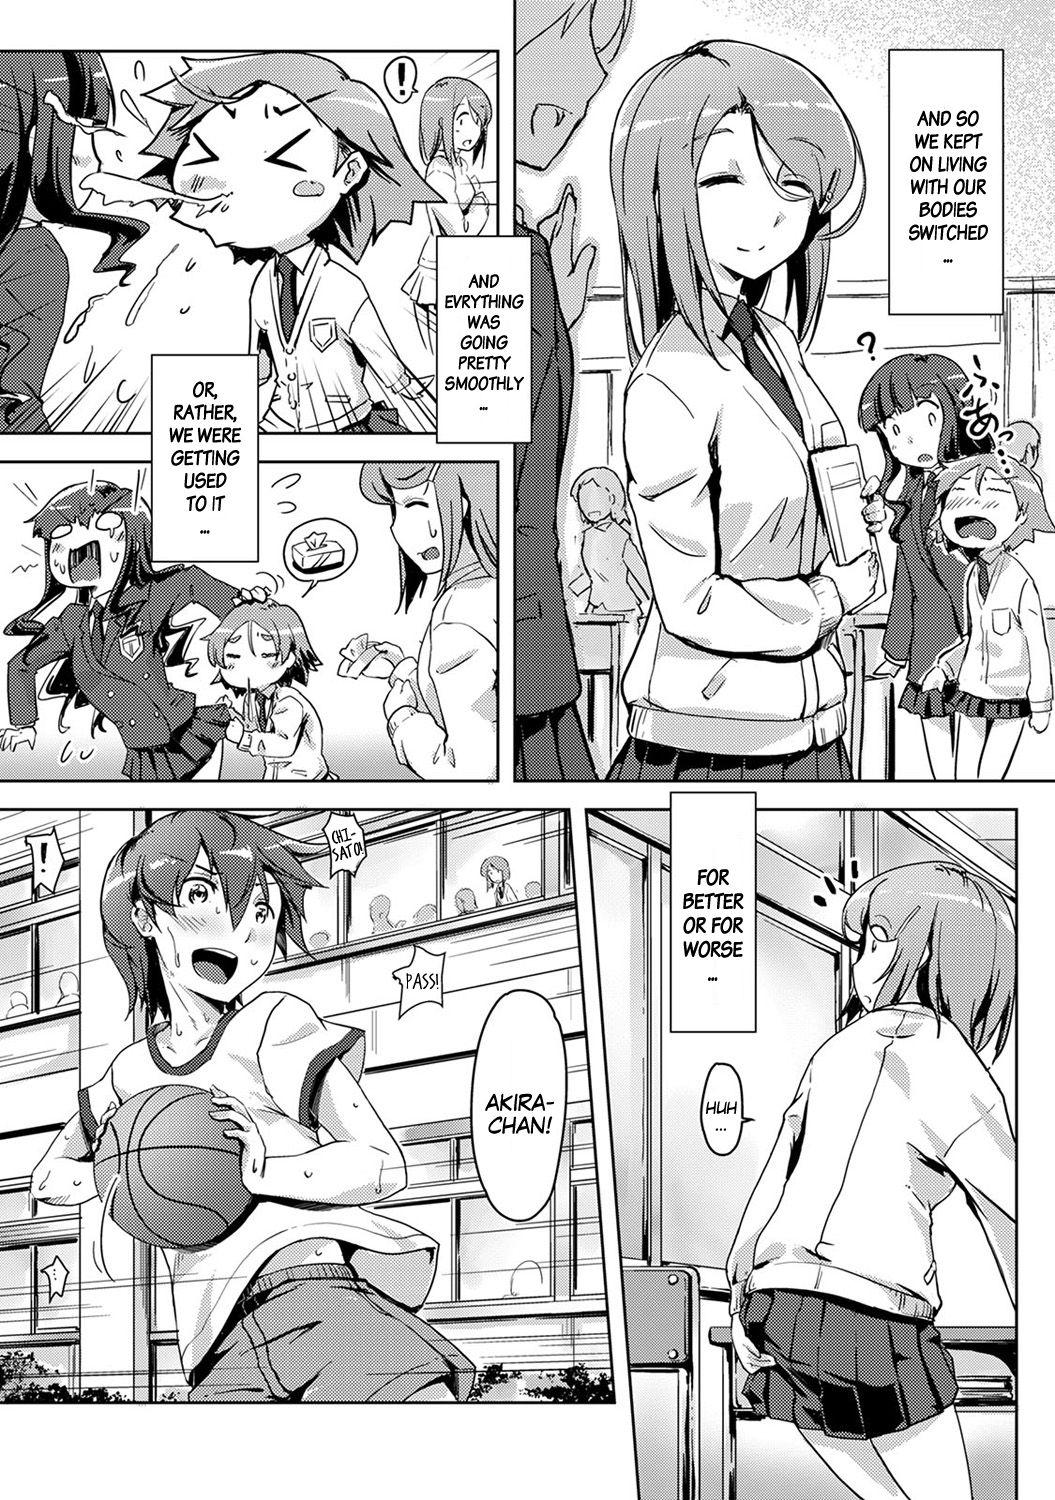 Ecchi Shitara Irekawacchatta!? | We Switched Our Bodies After Having Sex!? Ch. 3 3